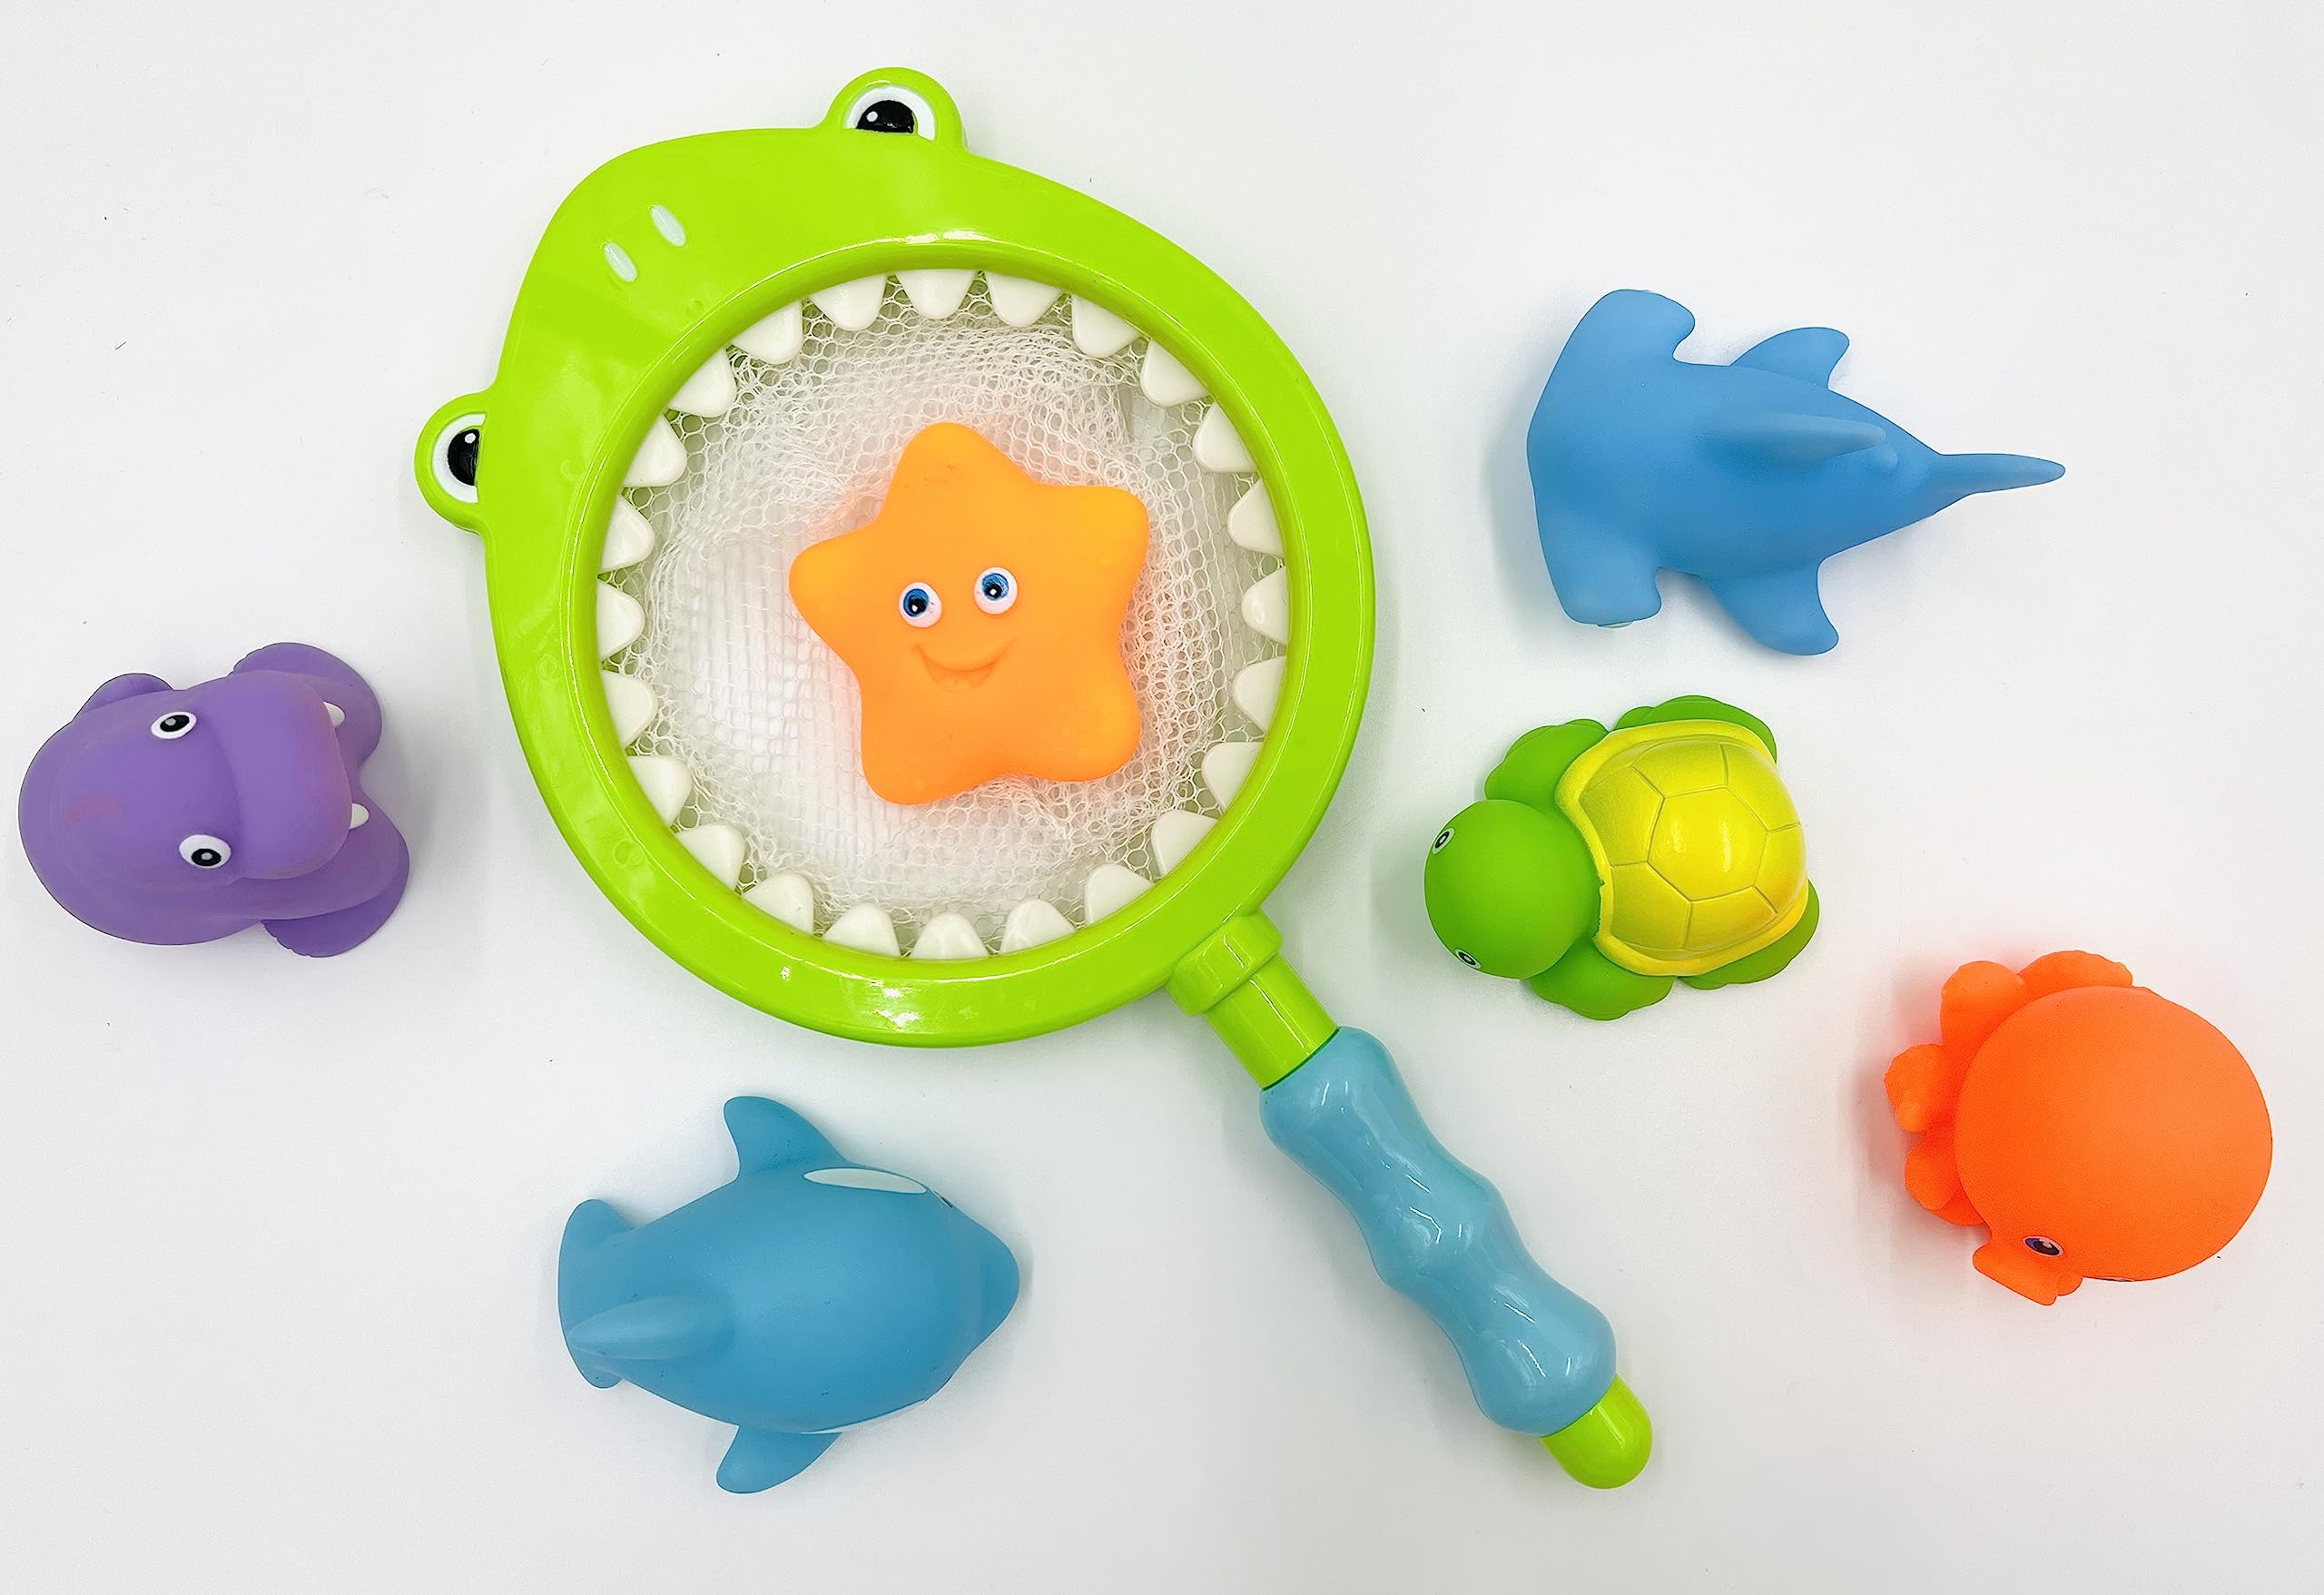 VIO Bath Toys, Fish Pool Toys with Sounds for Kids, Toddlers, Baby, Scoop Net Bath and Fishing Toys (7Pcs) (Color - Green)